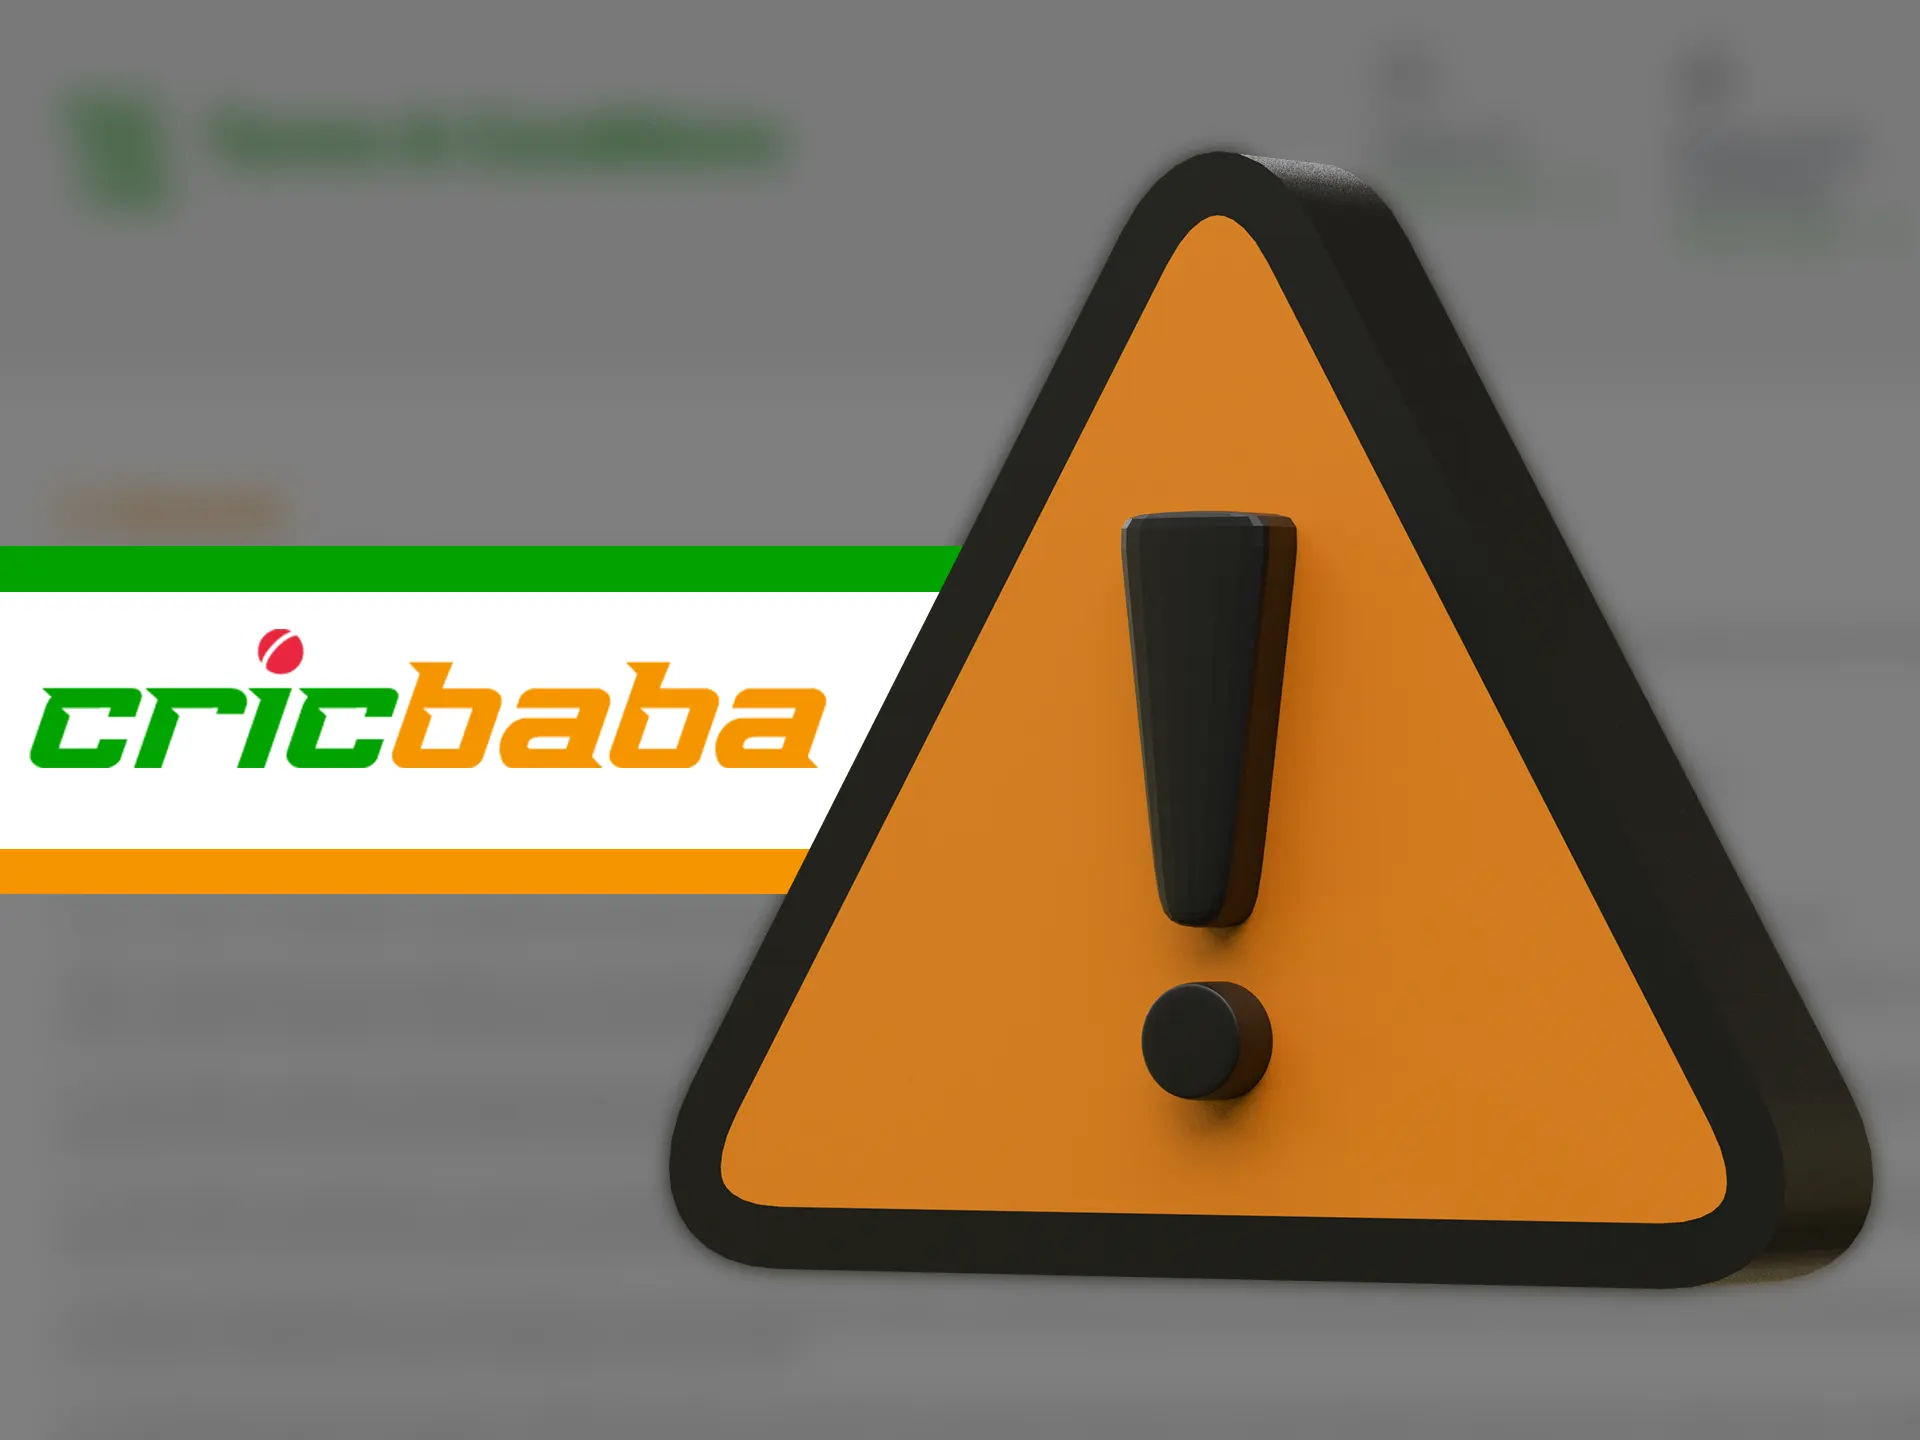 Cricbaba has its own rules to follow.